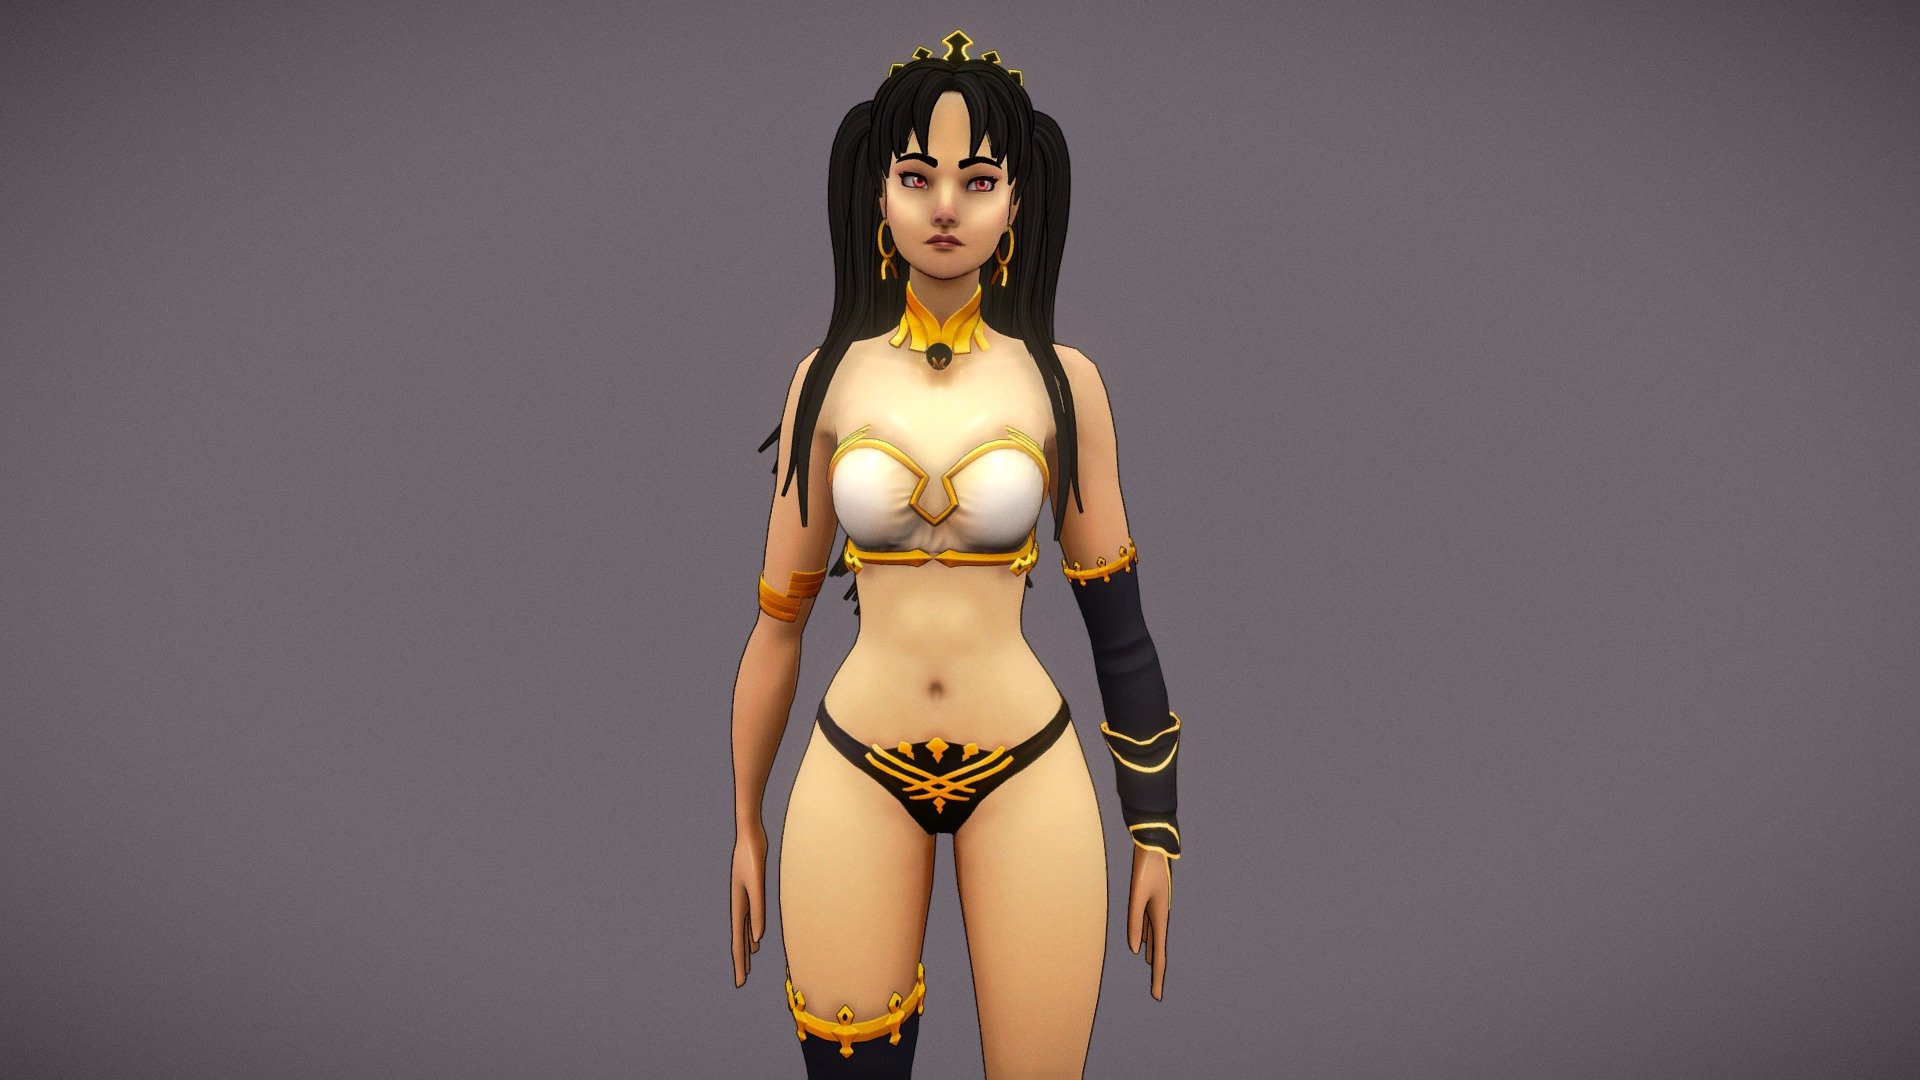 Fanart of Ishtar from Fate Grand Order! Sculpted in Zbrush, Painted in Substance Painter 3d model